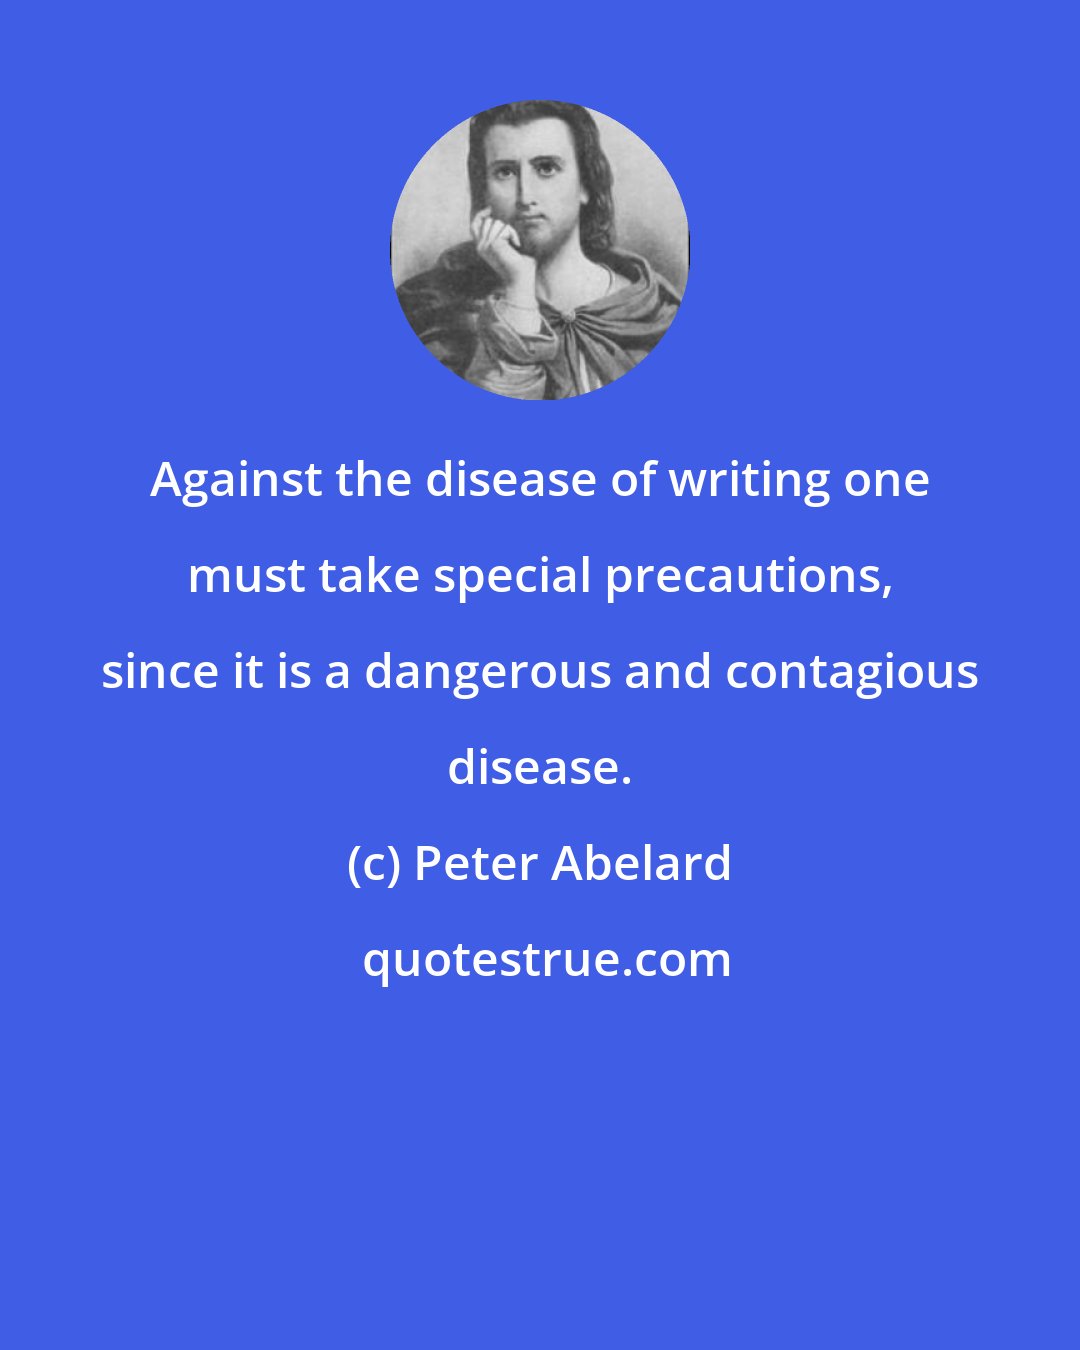 Peter Abelard: Against the disease of writing one must take special precautions, since it is a dangerous and contagious disease.